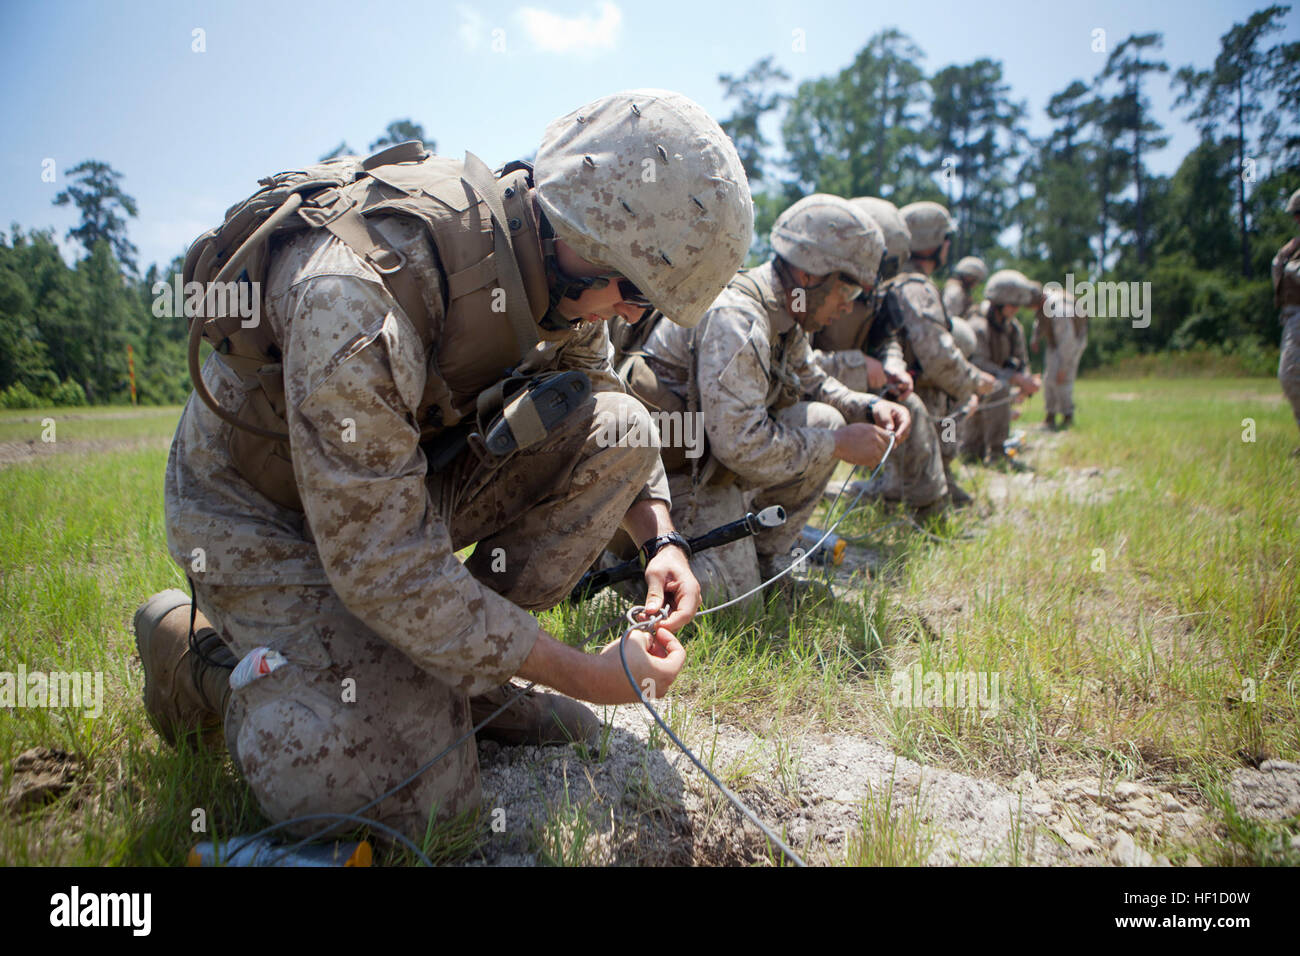 Marines with 2nd and 4th Combat Engineer Battalions and 8th Engineer Support Bn. connect TNT wires using 'the British Junction' knot during a demolition range aboard Marine Corps Base Camp Lejeune, July 23, 2013. The Marines were required to create each type of charge they were going to ignite, to include doughnut, oval, concrete, det-linear, uli-knot slider, fence, window and water charges. (U.S. Marine Corps photo by Cpl. Marcin Platek/Released) 2nd, 4th CEB and 8th ESB Marines complete first Reserve Sapper Course 130323-M-QX735-581 Stock Photo